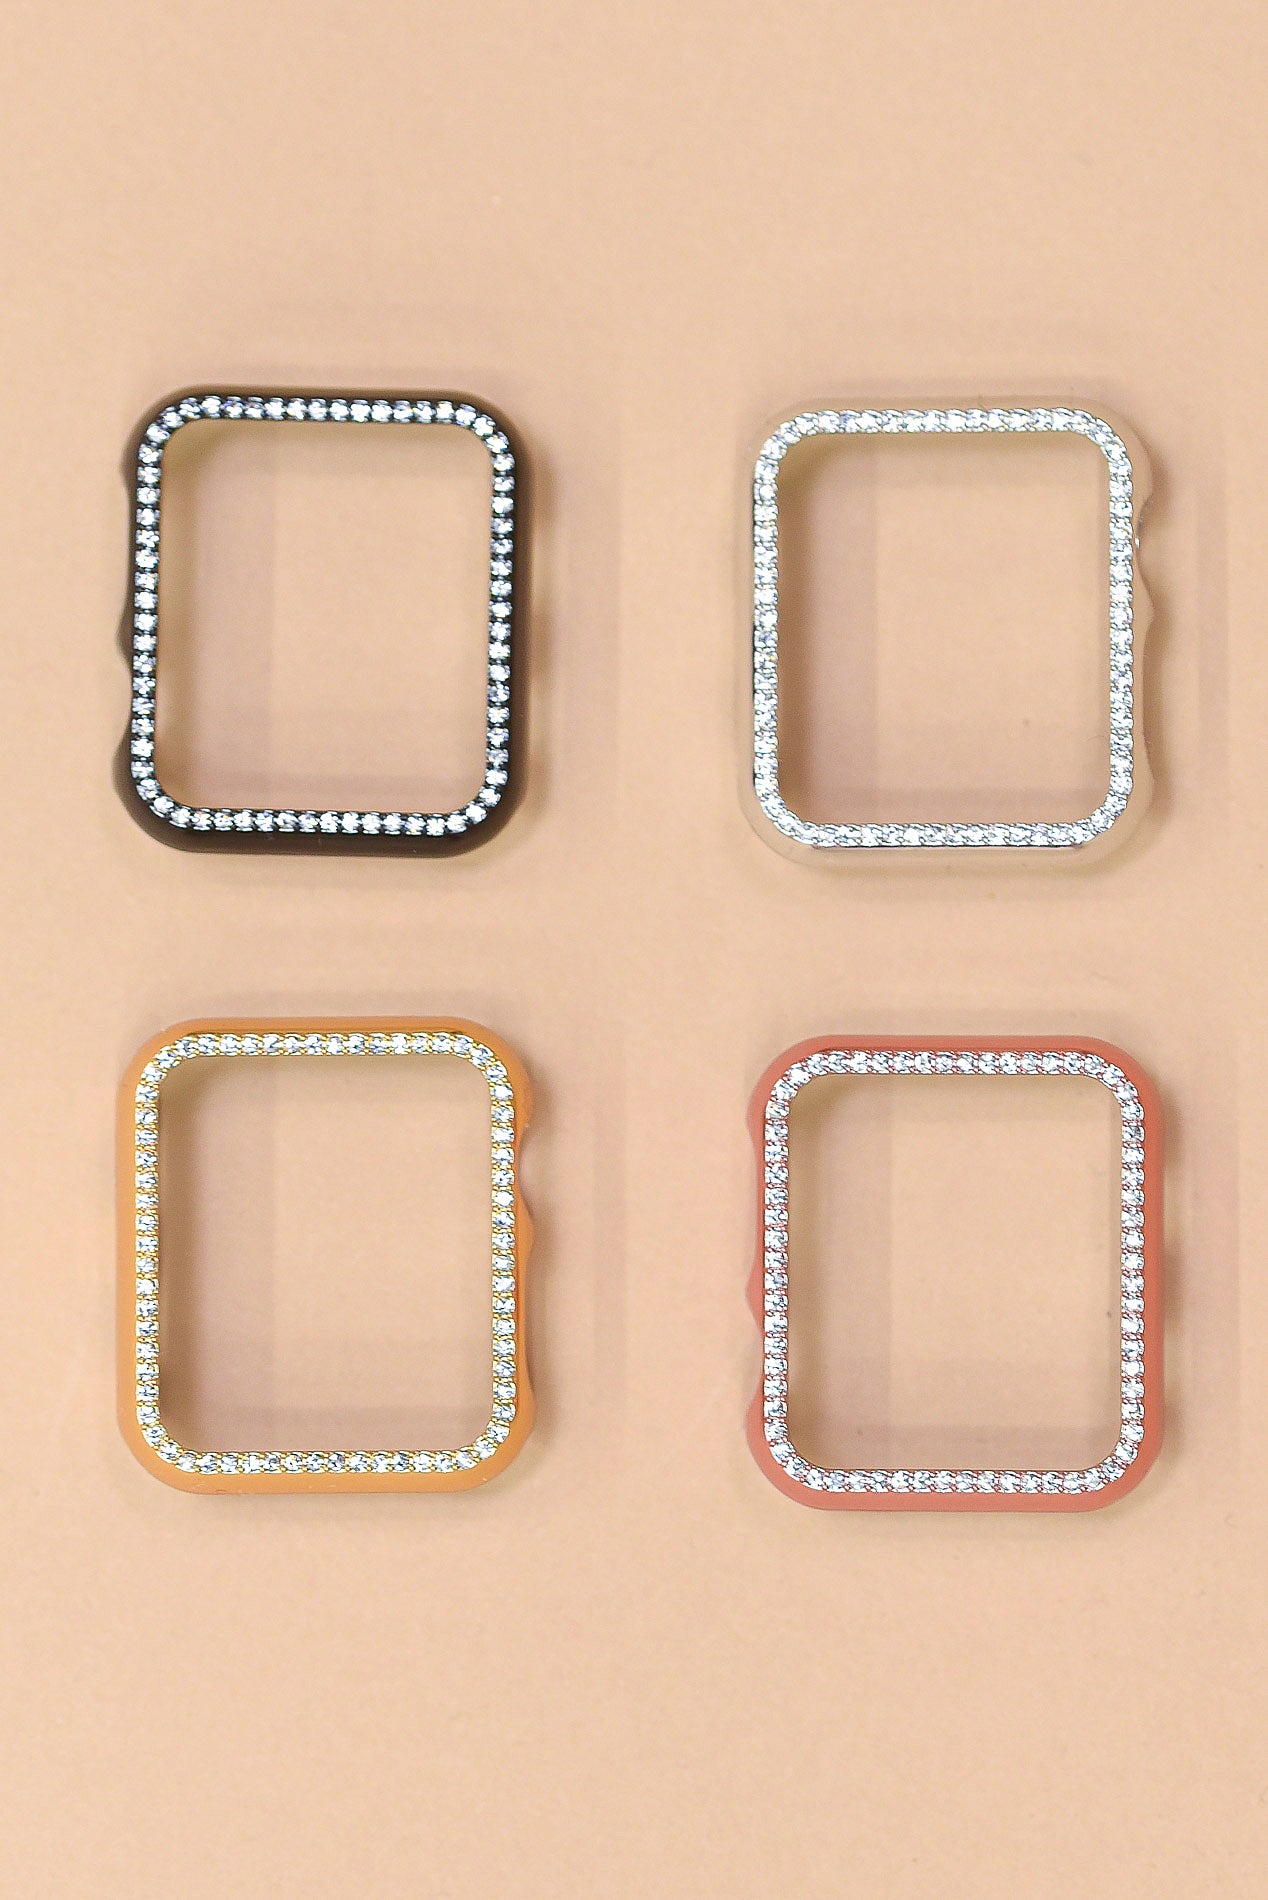 Apple Watchband Bling Face Cover (42MM) - WB032